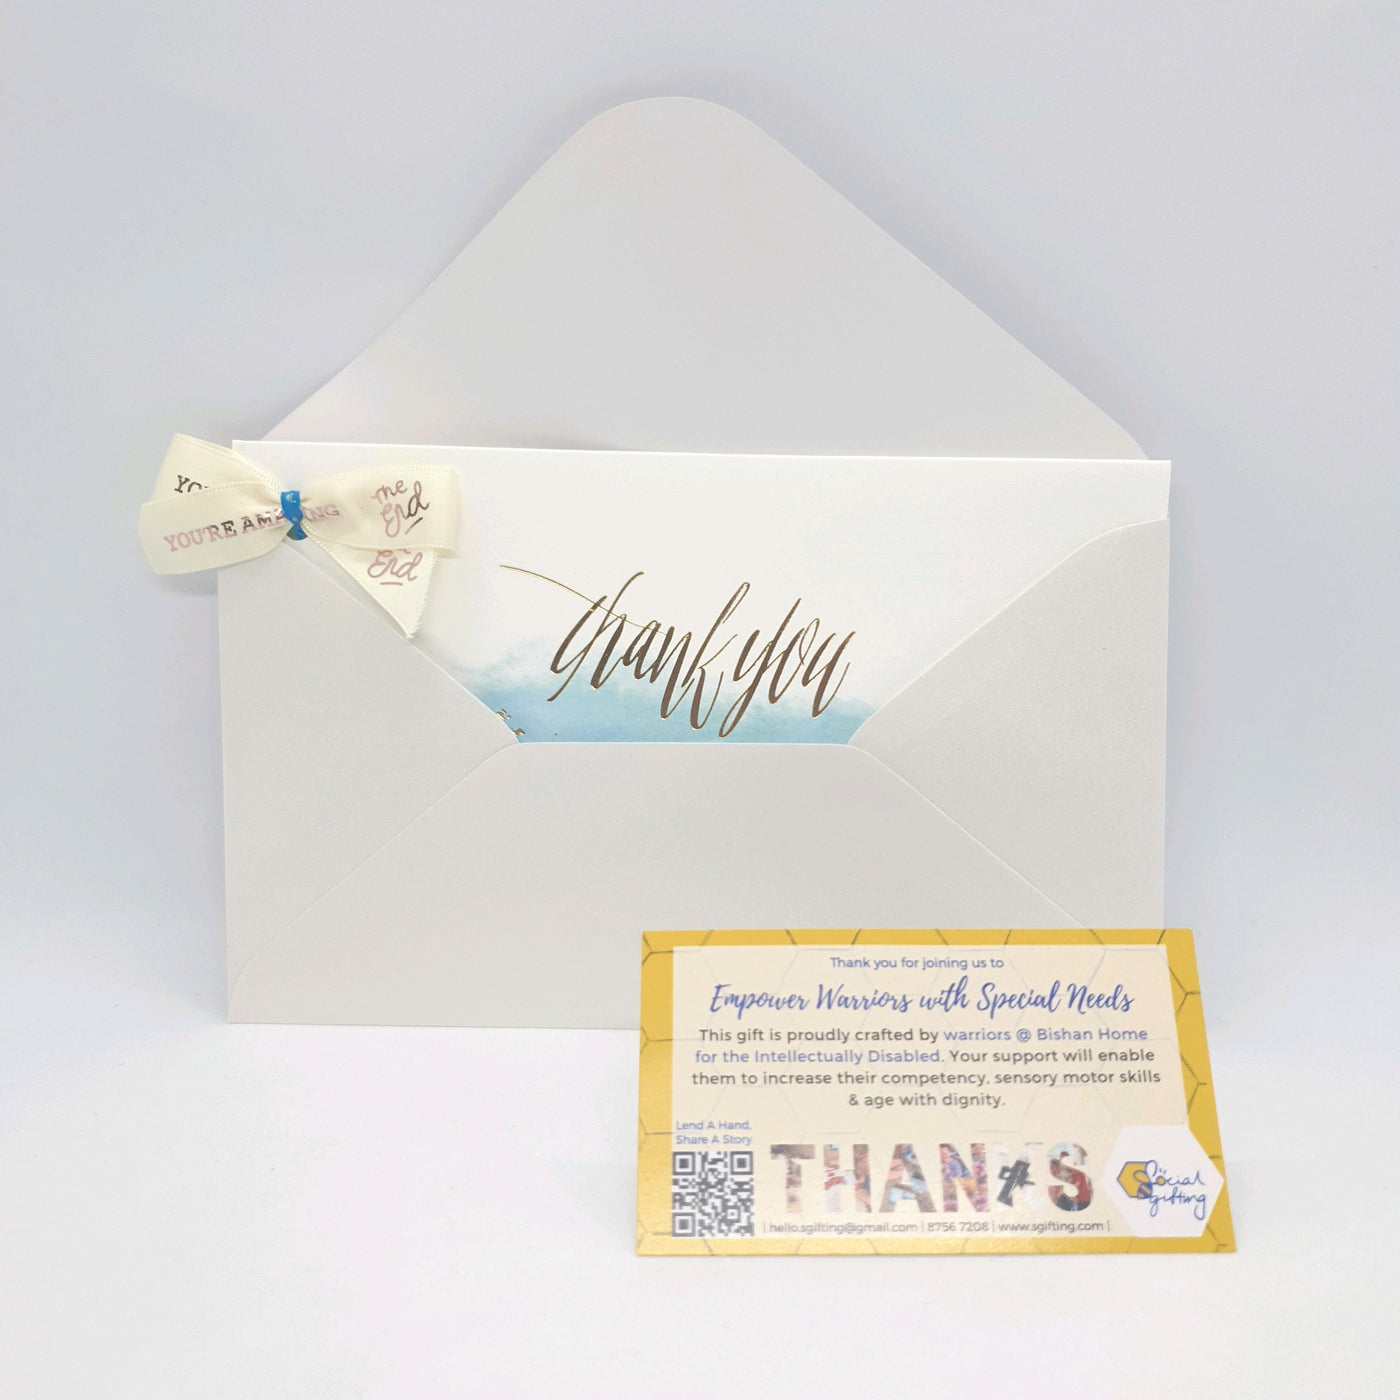 Greeting cards - Thank you with ribbon